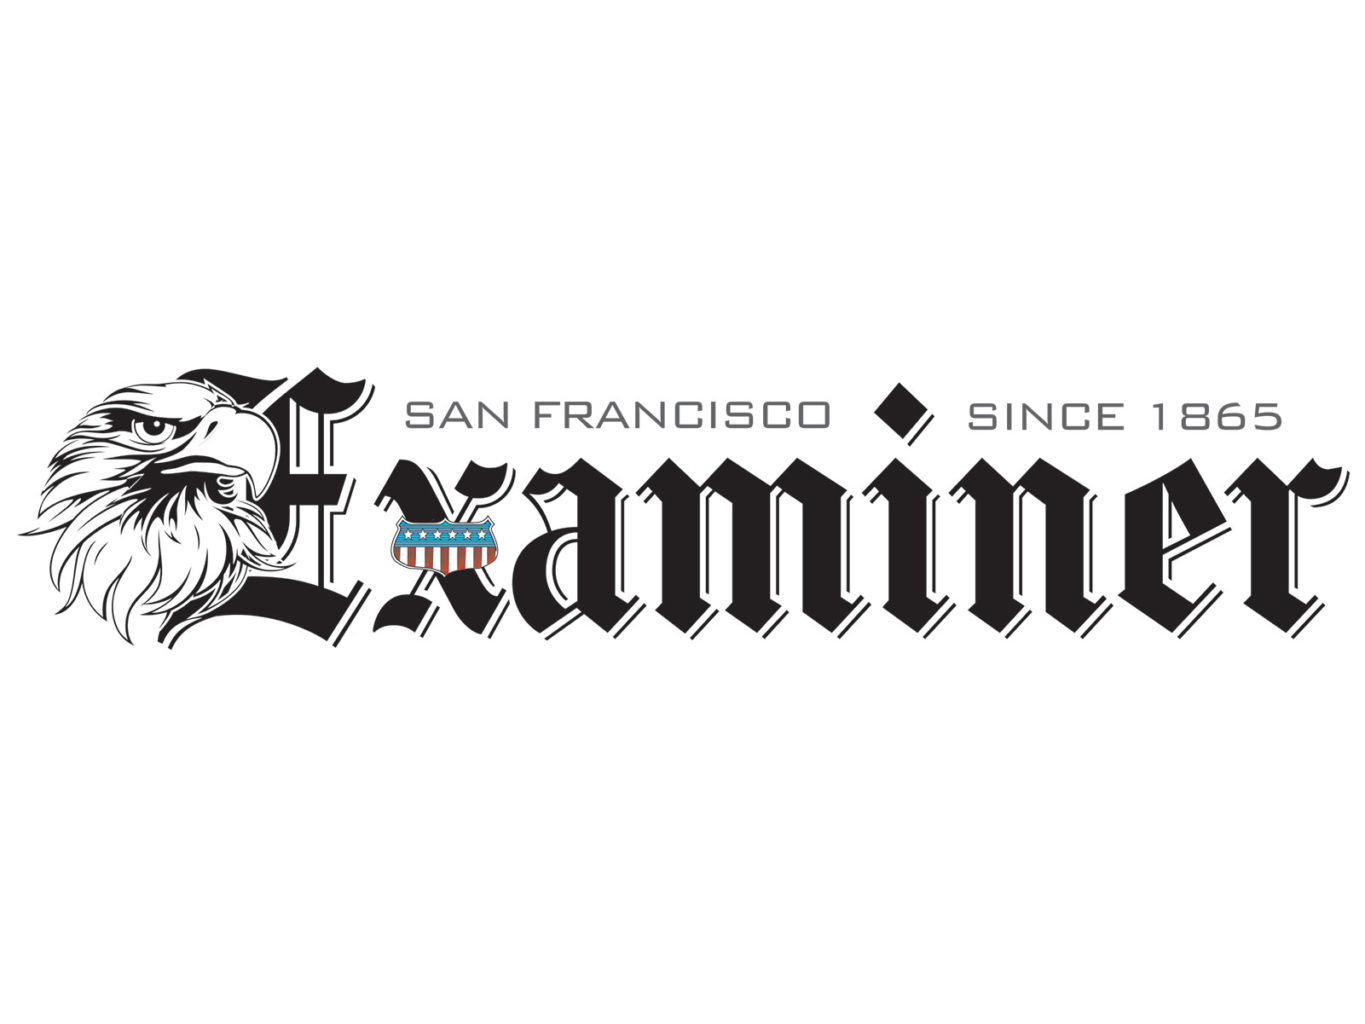 SF Examiner, Museum of Craft and Design